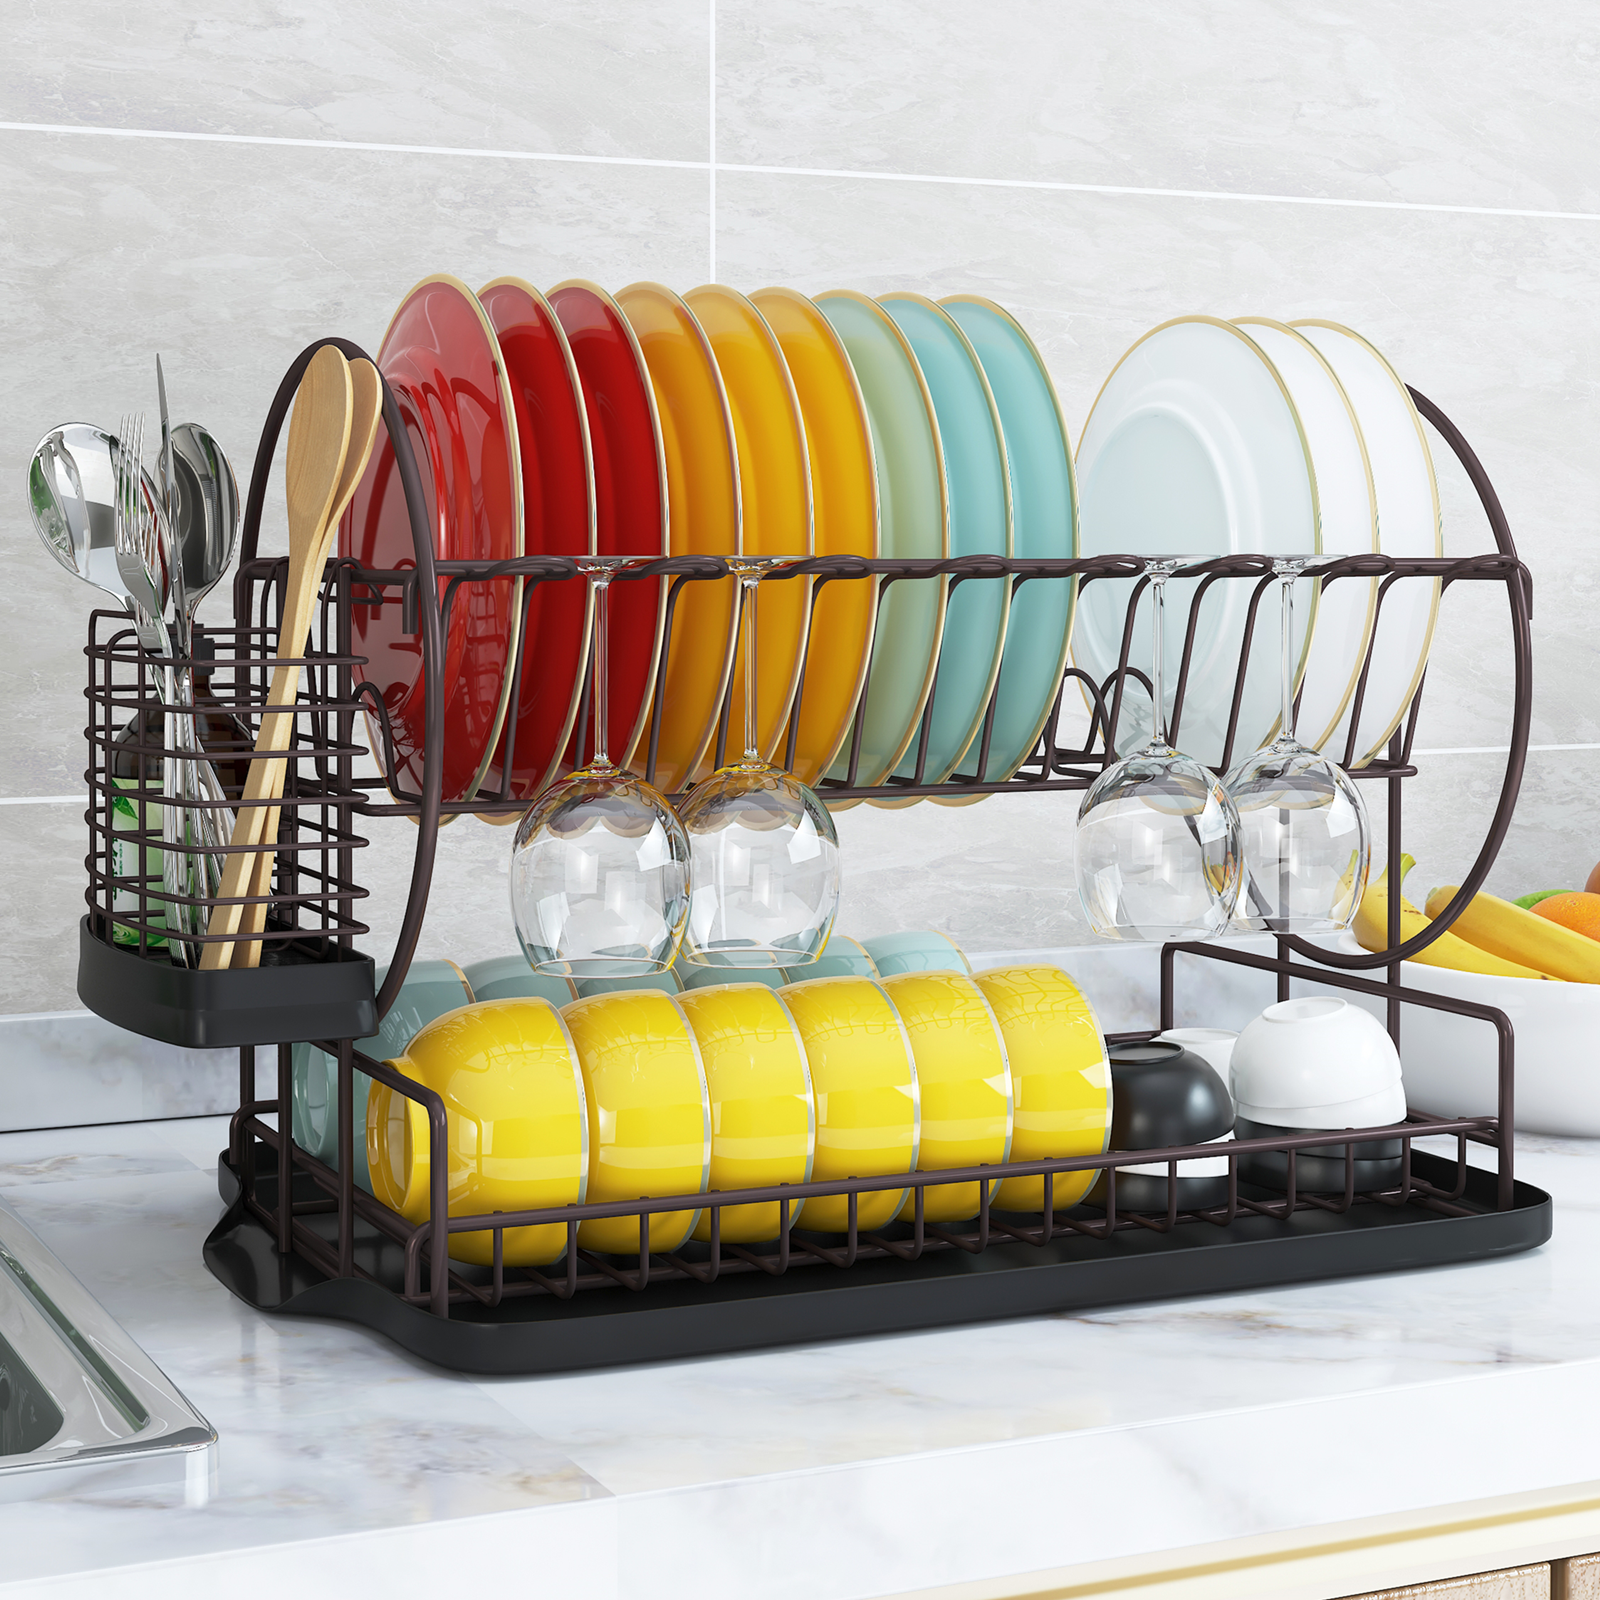 Shop Compact Kitchen Dish Rack Drainboard Set,plastic Dish Drying Rack,kitchen  Drain Rack With Lid Cover,for Kitchen Organizer Storage